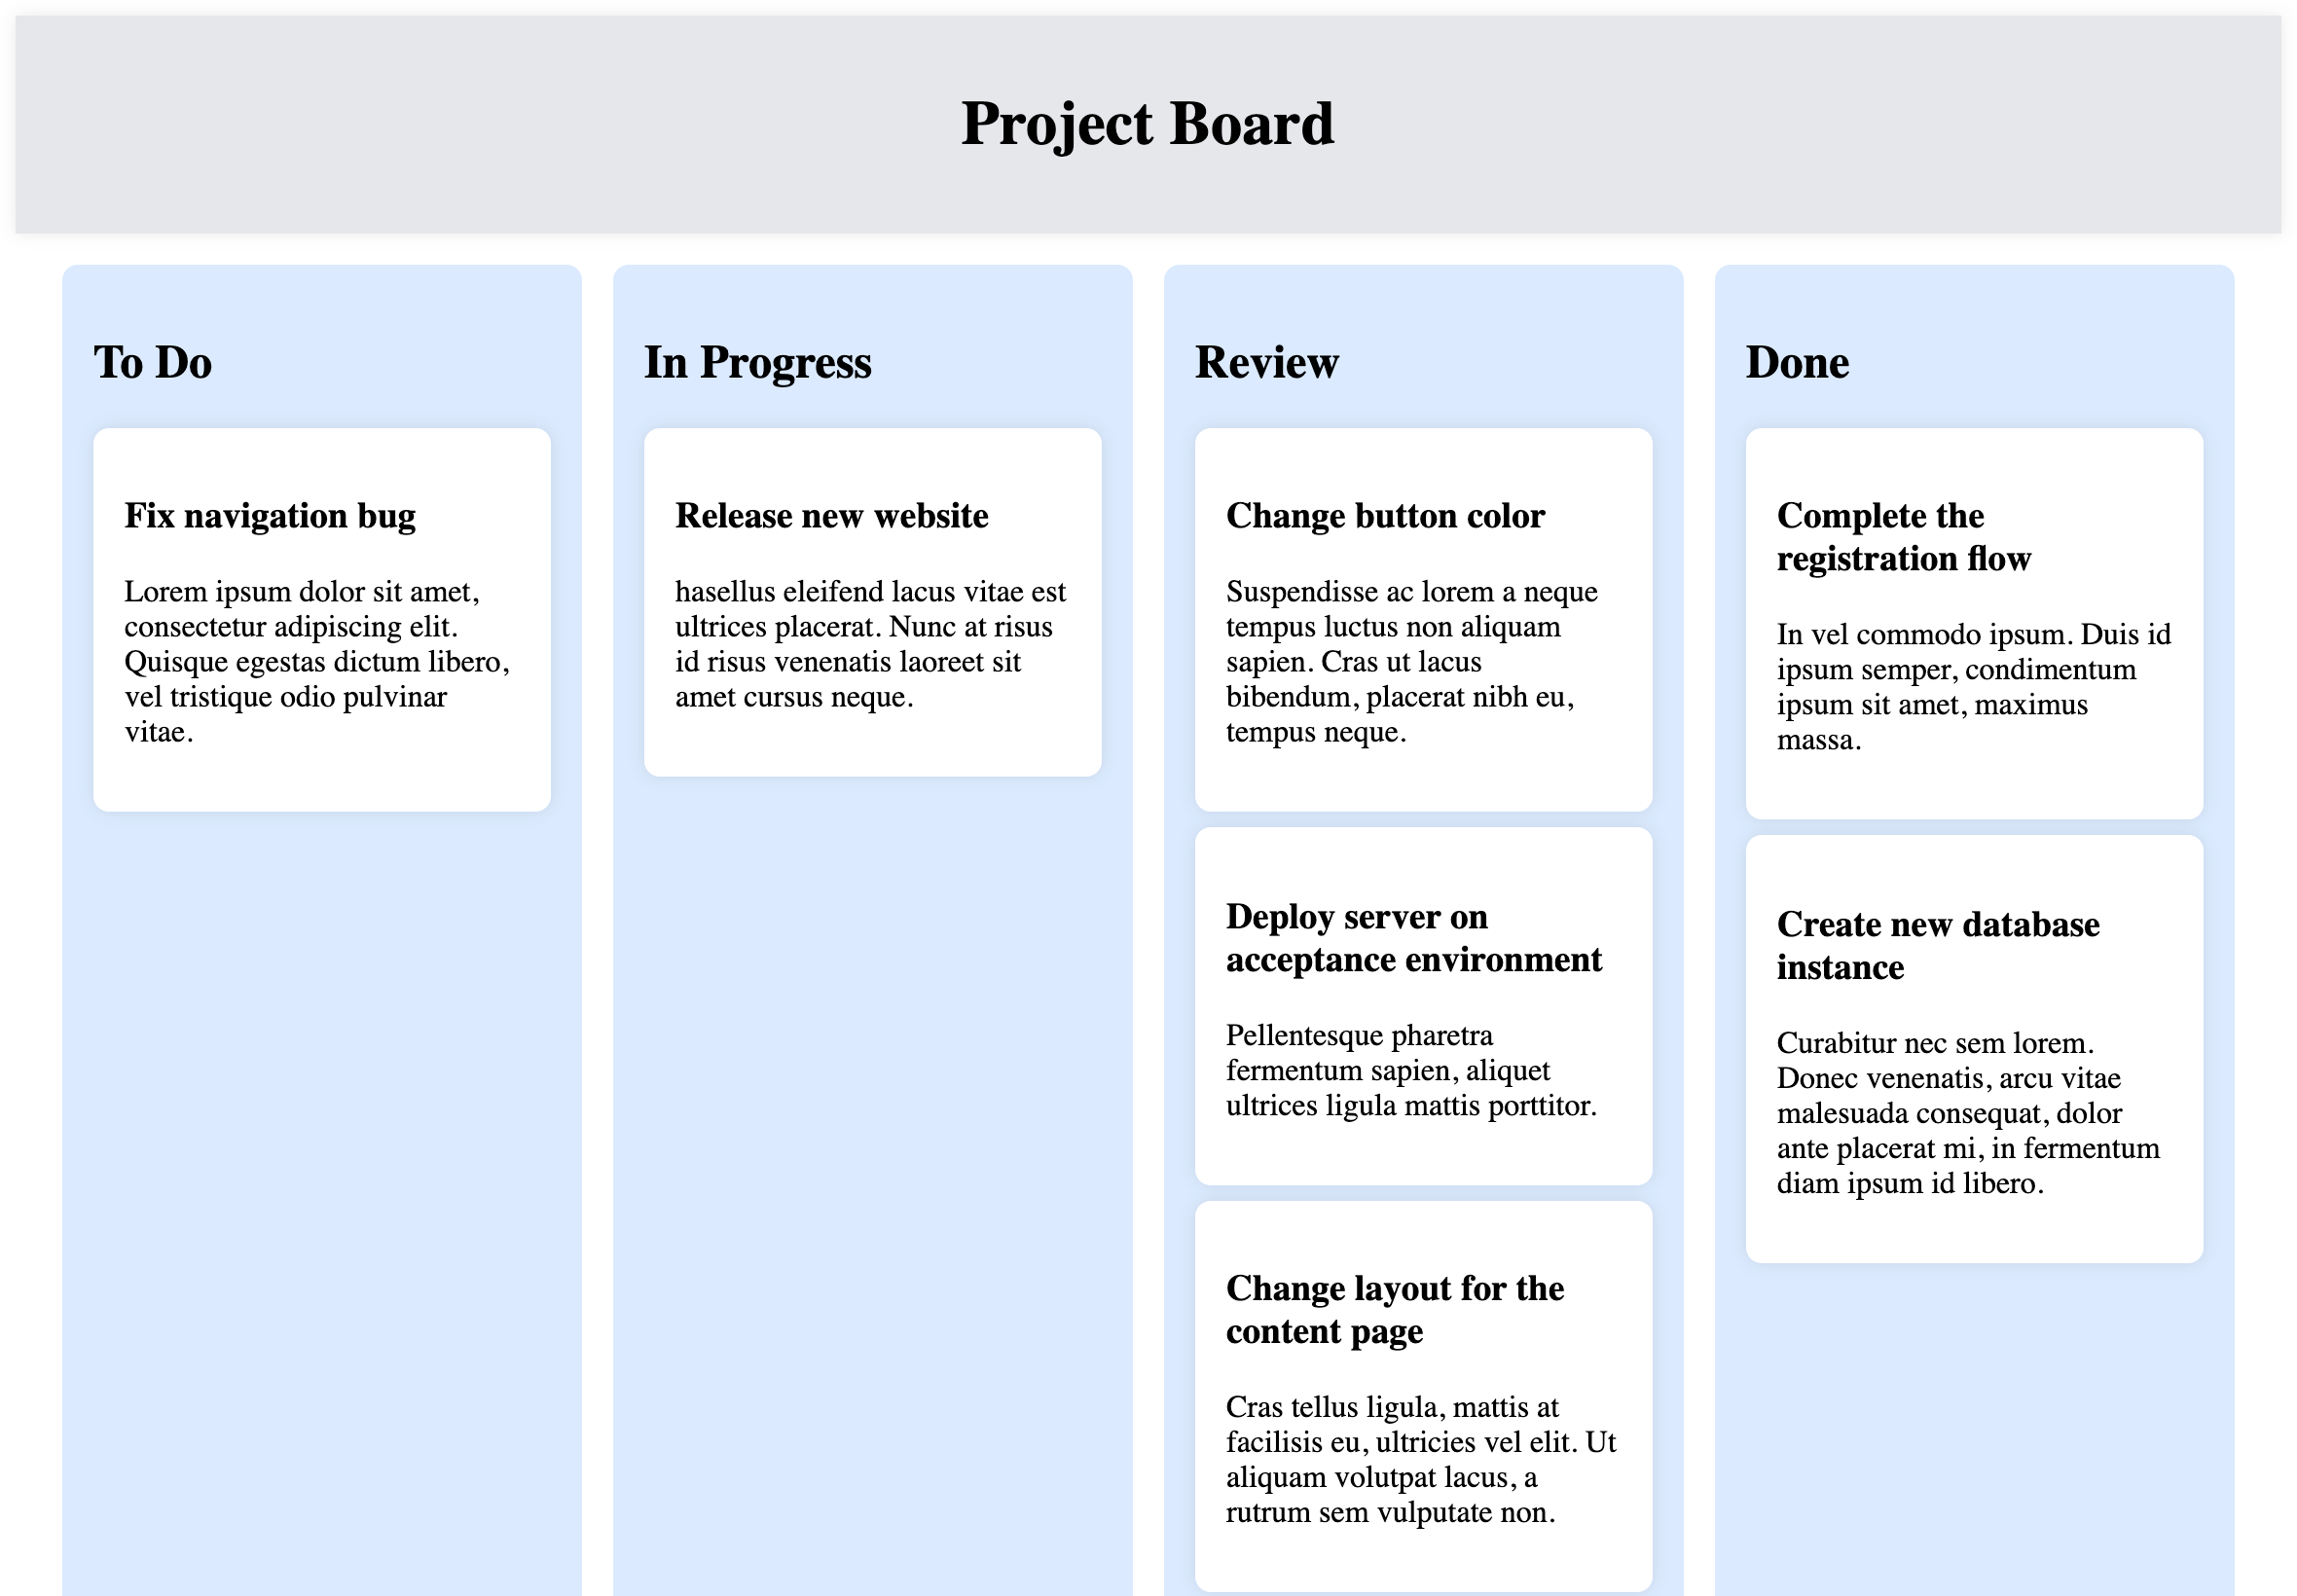 Project Board with tasks